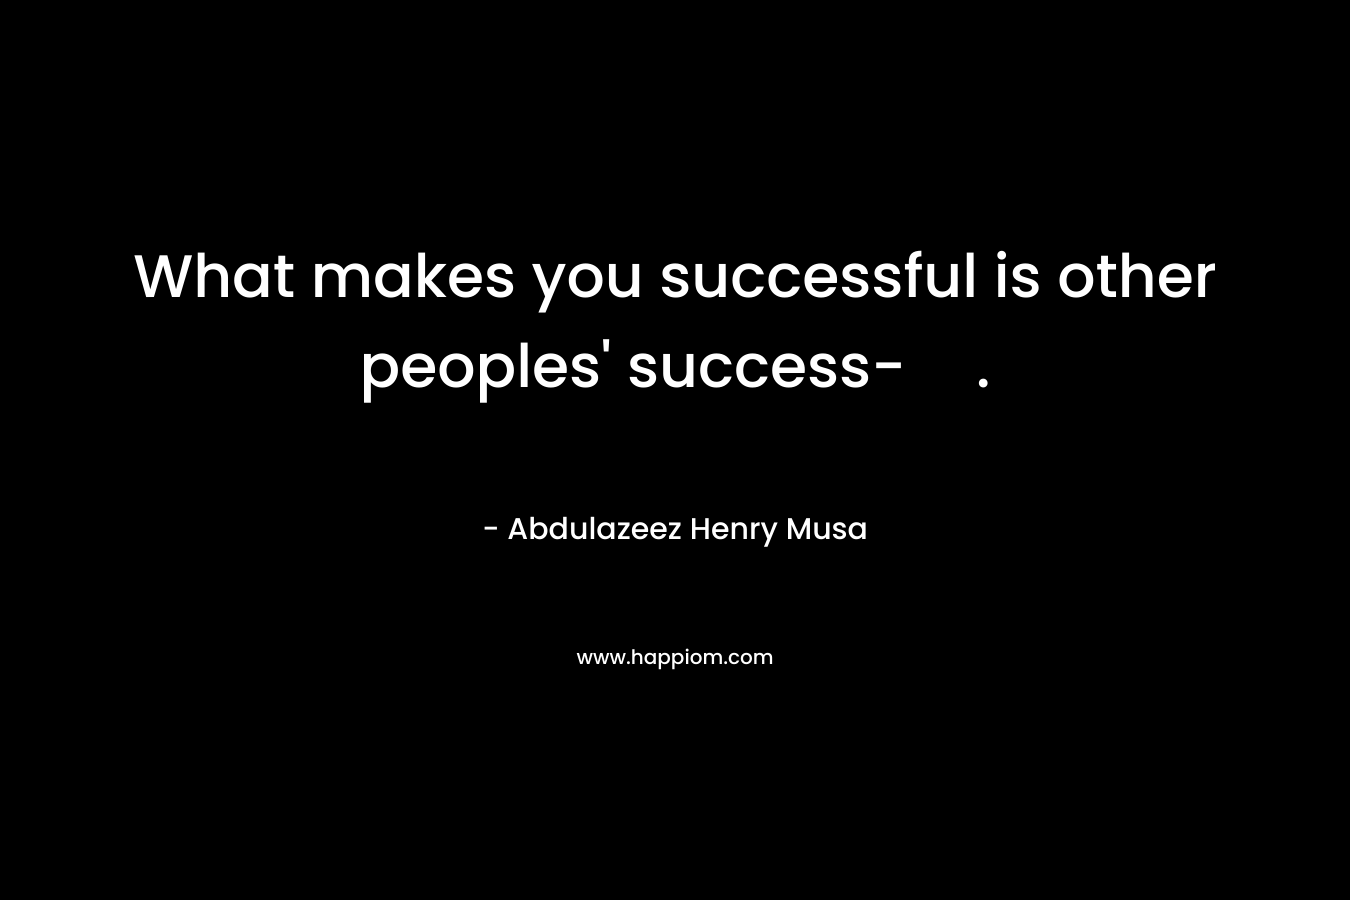 What makes you successful is other peoples' success-.